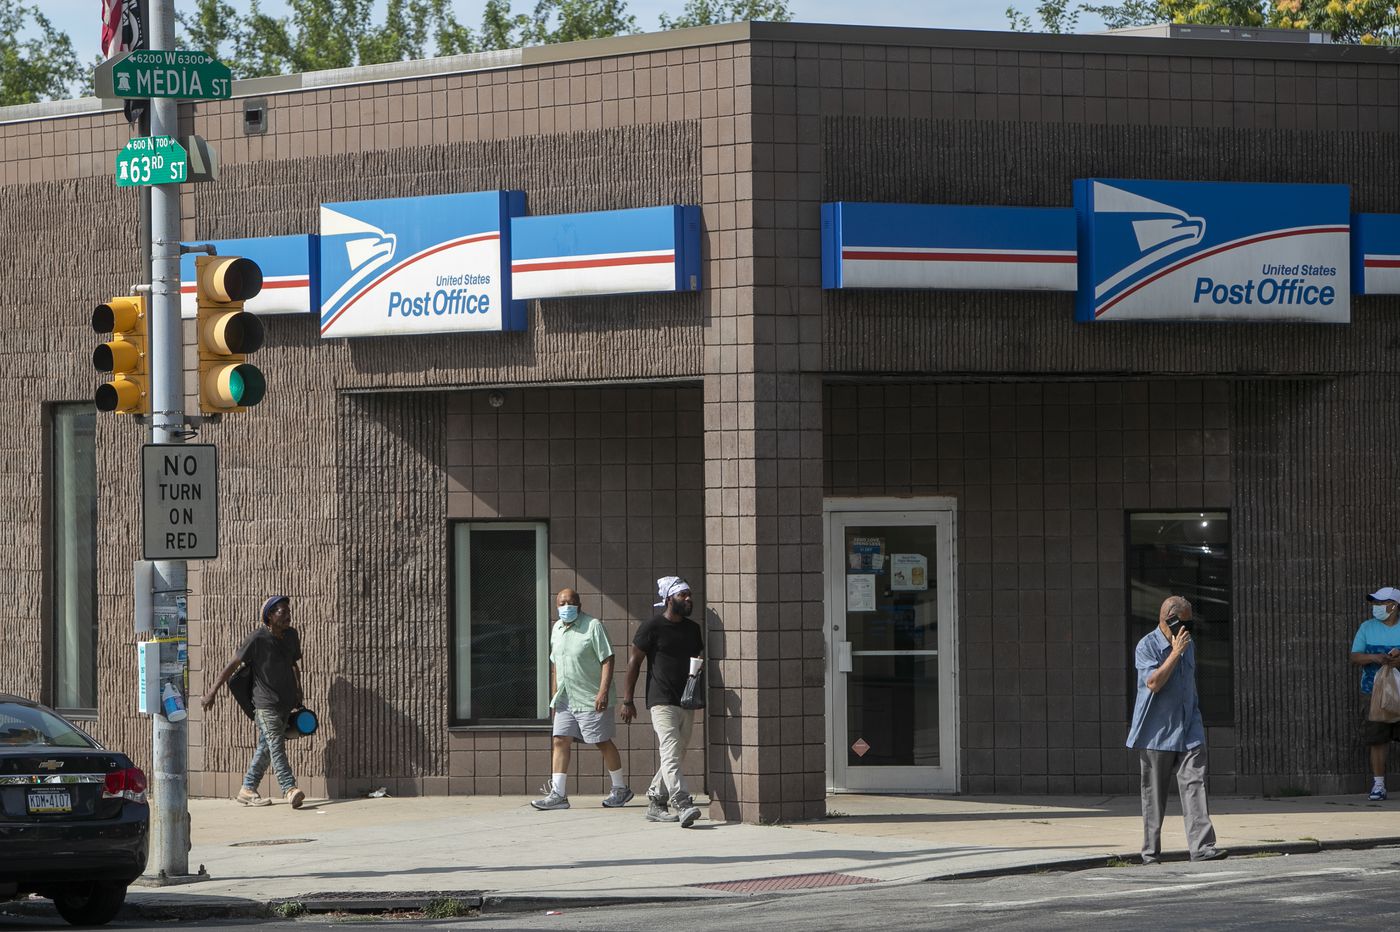 JPMorgan in talks to open Chase ATMs at Post Offices in USA